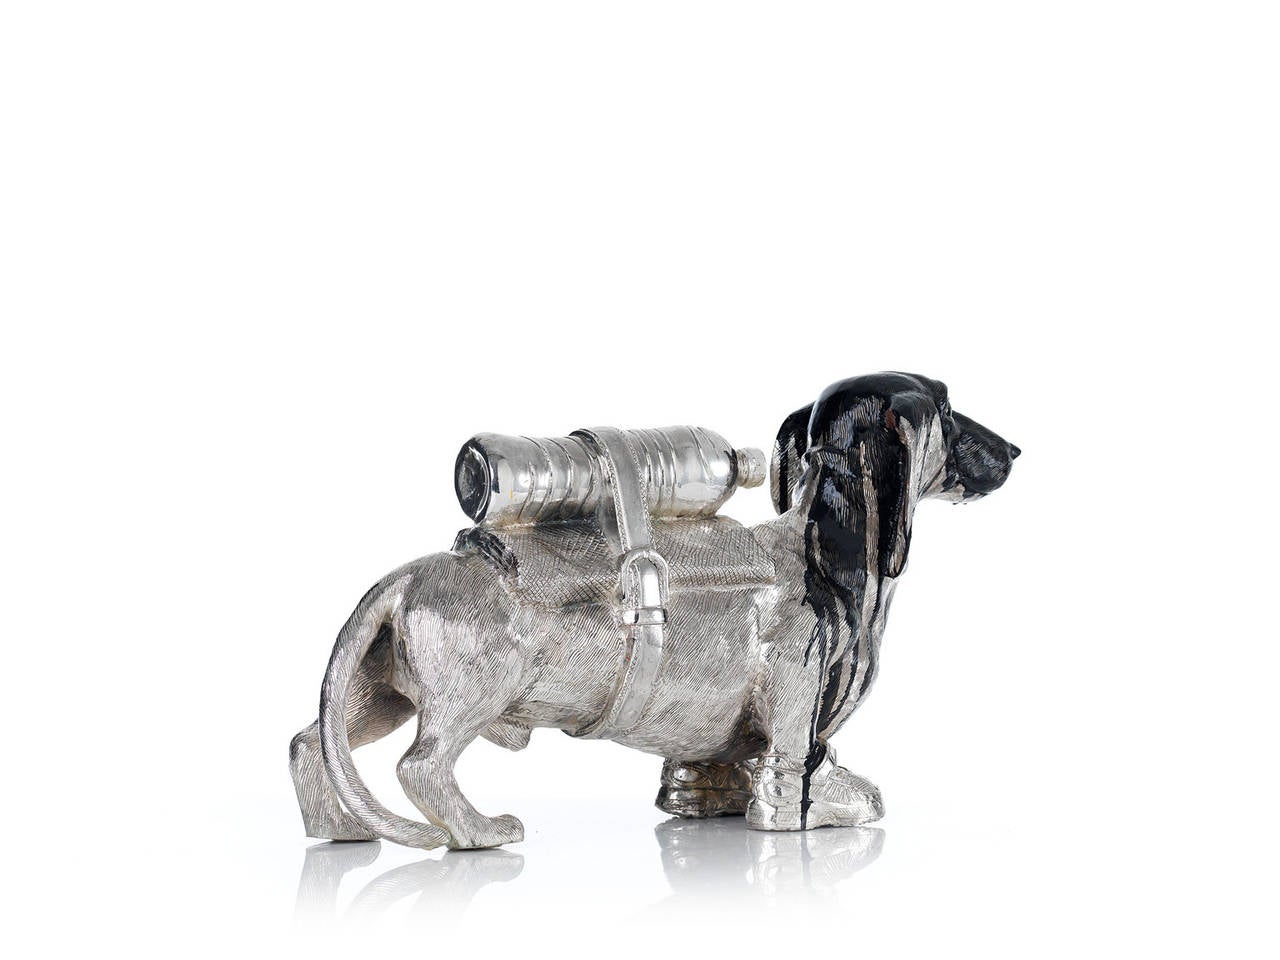 Cloned Dachshund with pet bottle. - Pop Art Sculpture by William Sweetlove